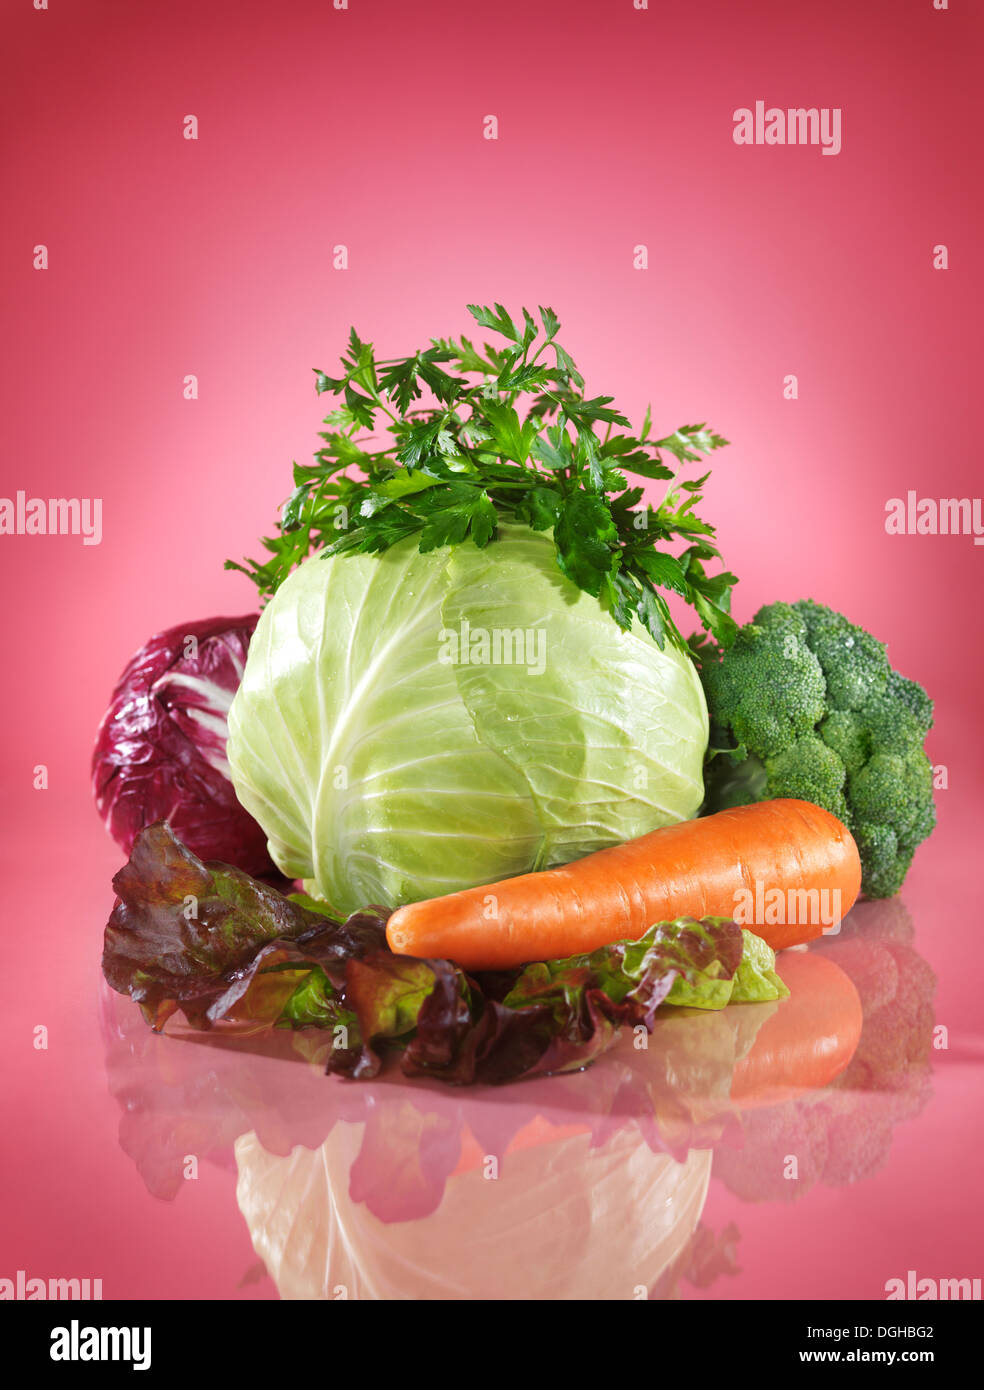 Colorful vegetable healthy food still life, cabbage and greens on bright pink background Stock Photo